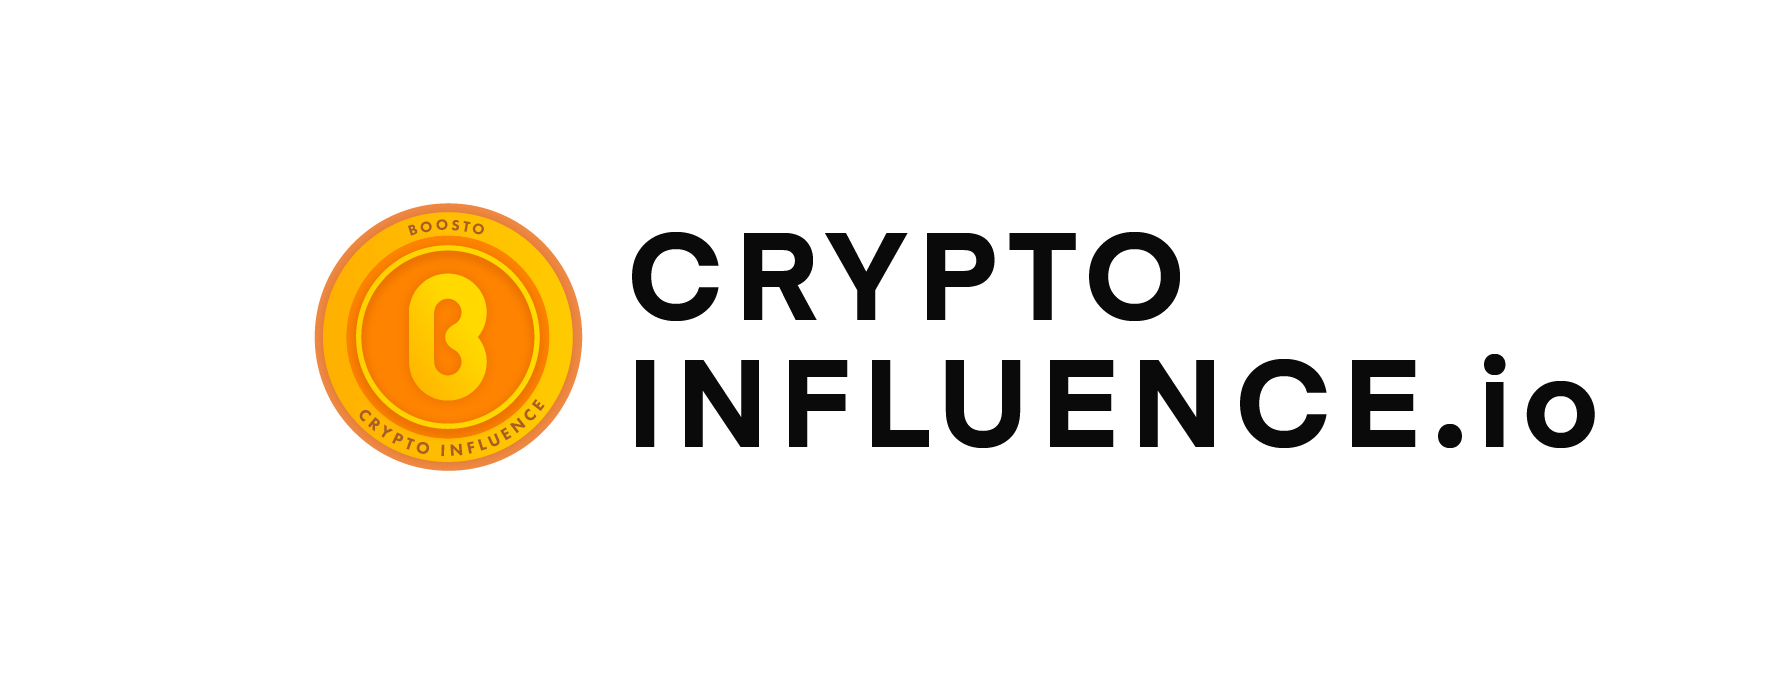 The Cryptoinfluence Summit: Fuel The Mass Adoption Of Blockchain Technology